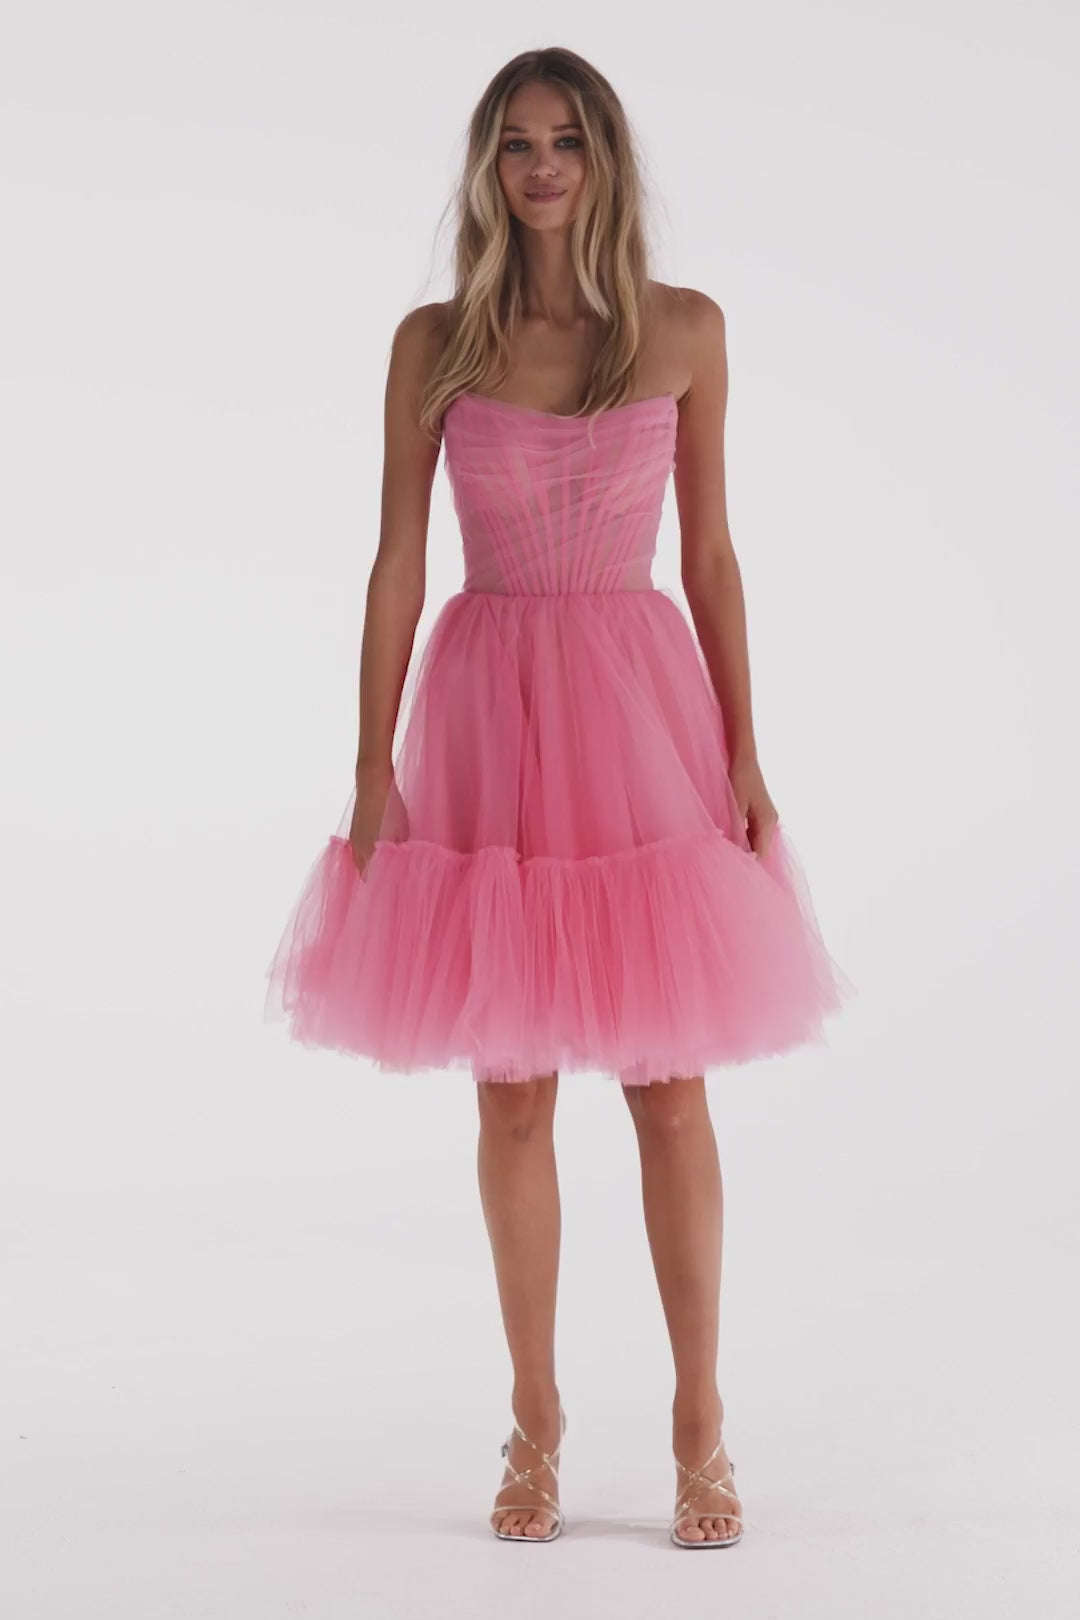 Combination sparkly tulle dress ➤➤ Milla Dresses - USA, Worldwide delivery